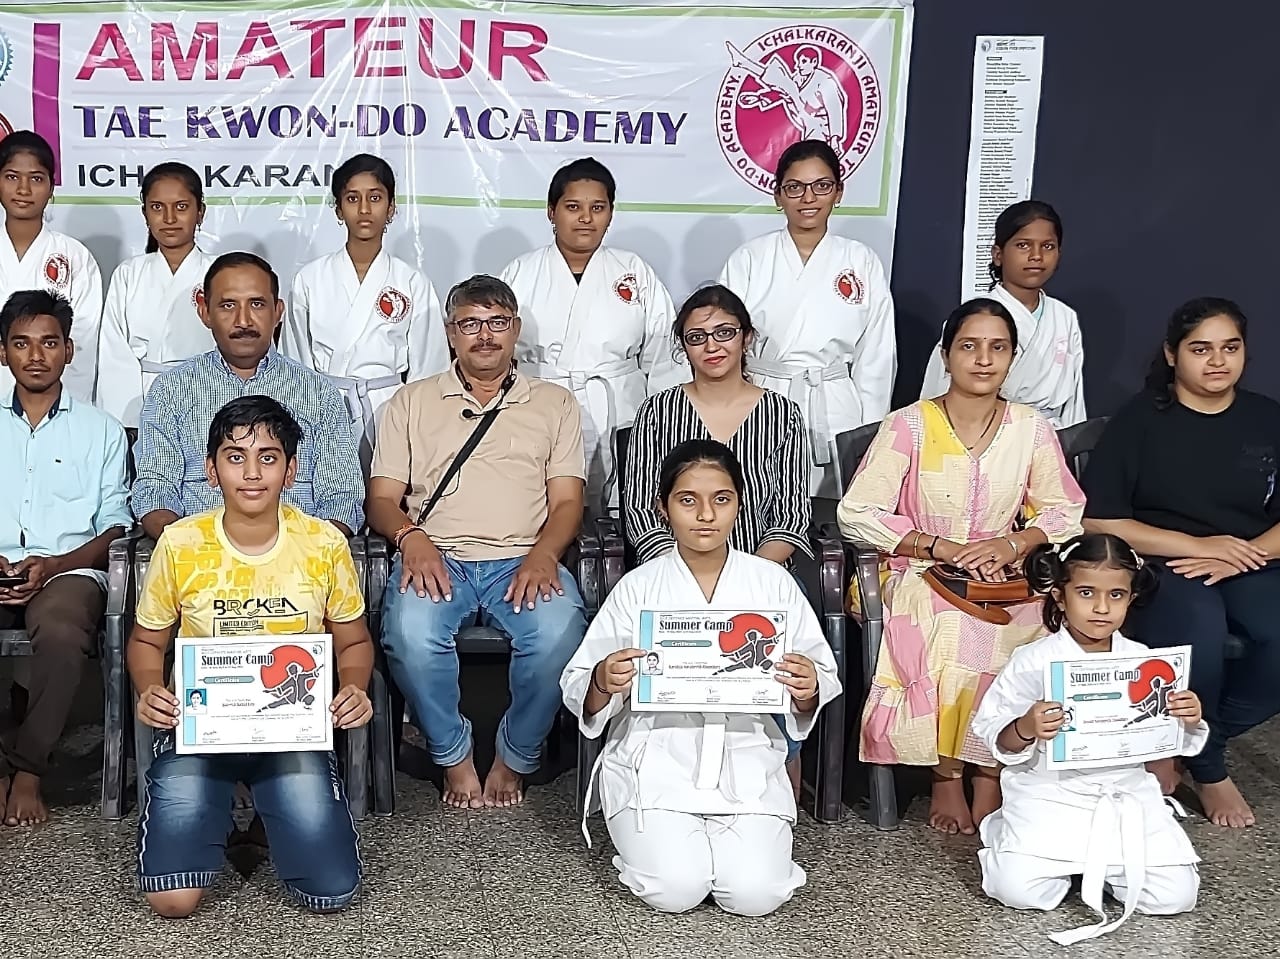 Harshita Chaudhary of Pondicherry stands first in Amateurs Martial Arts Summer Camp